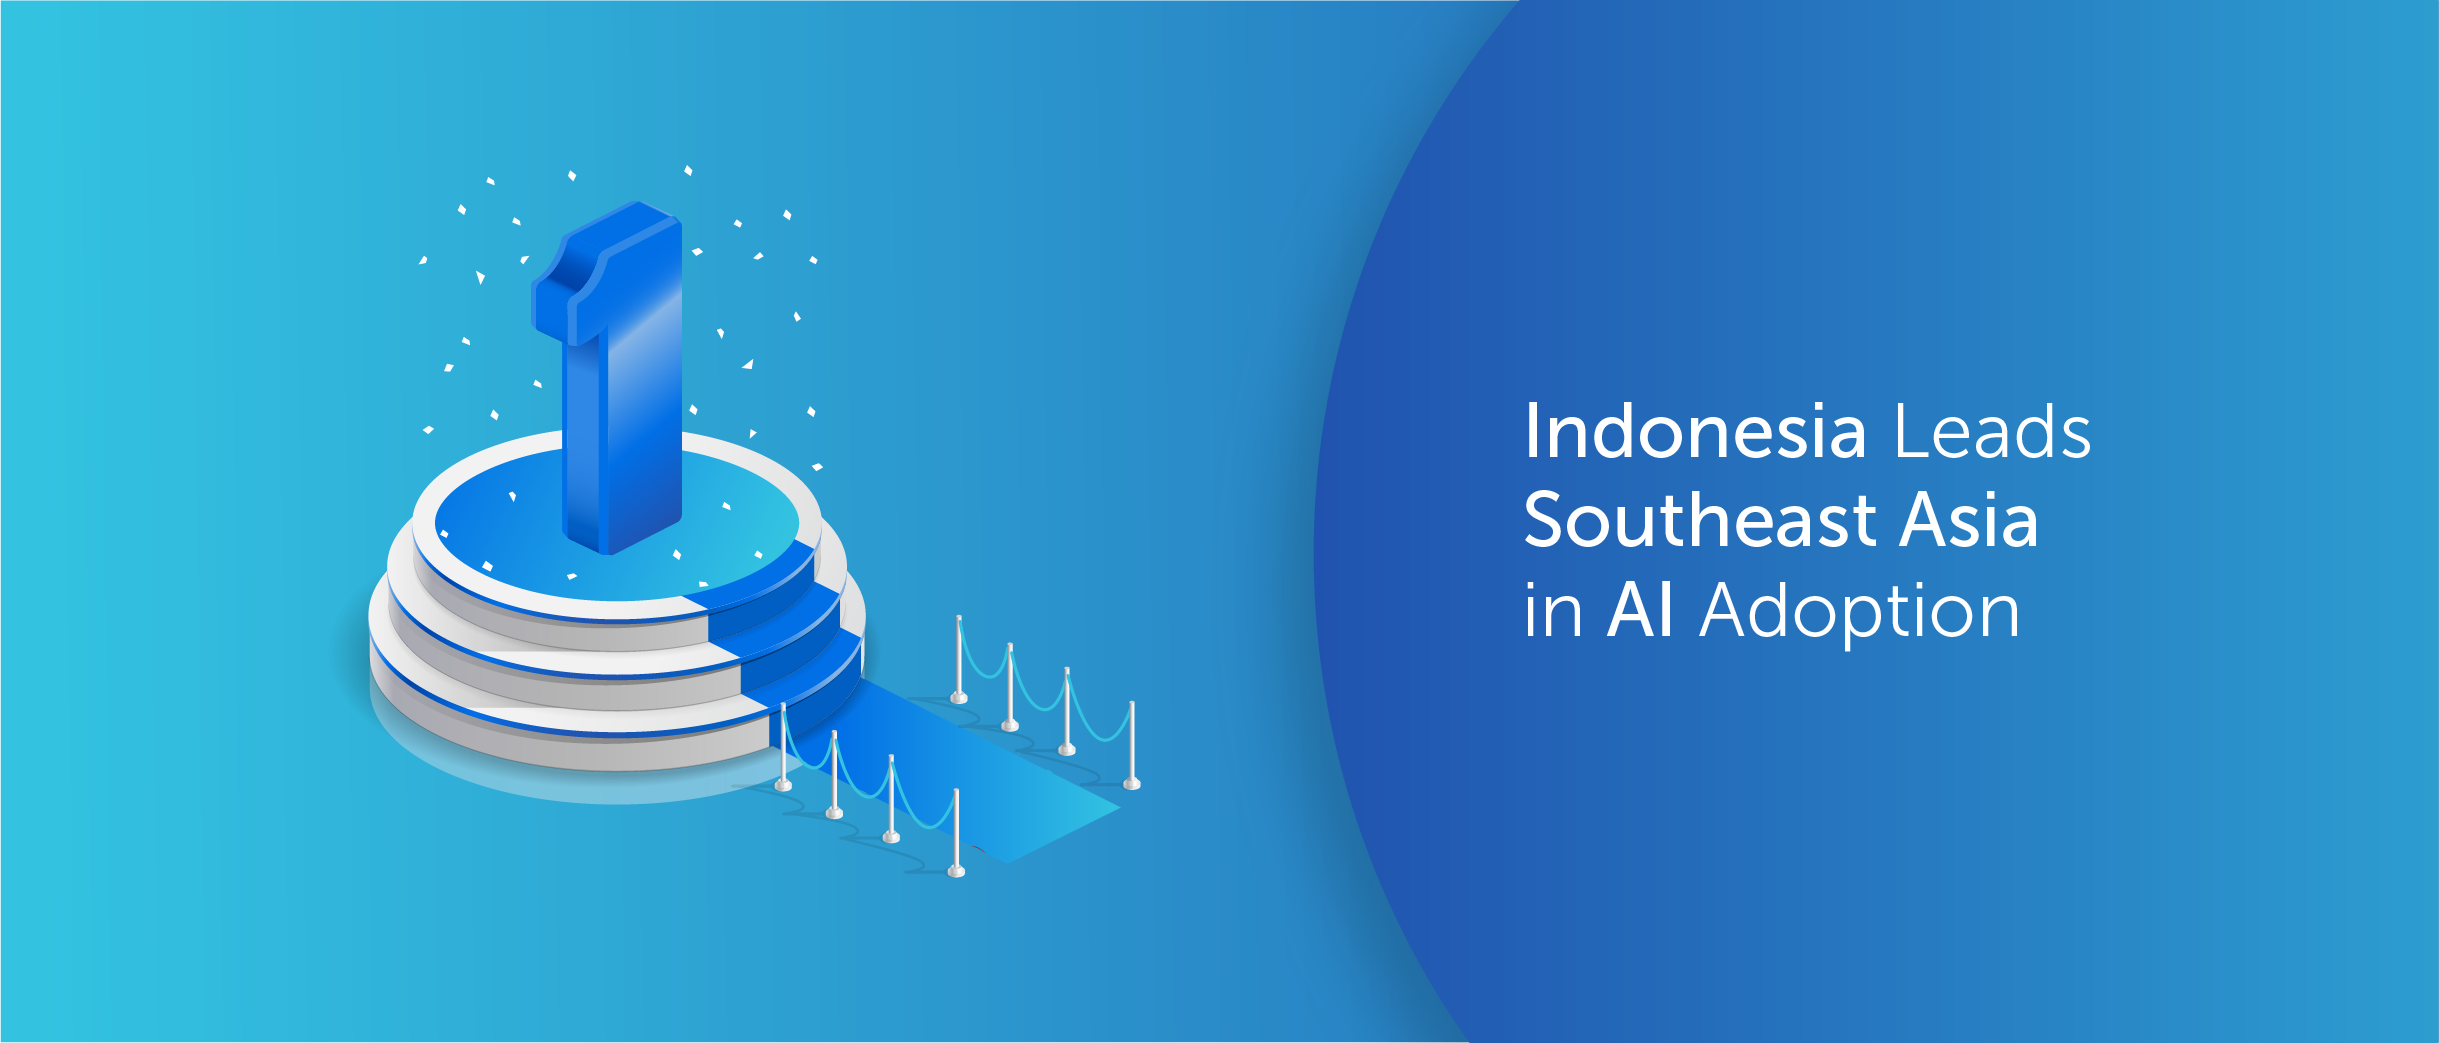 Indonesia Leads Southeast Asia in Artificial Intelligence Adoption